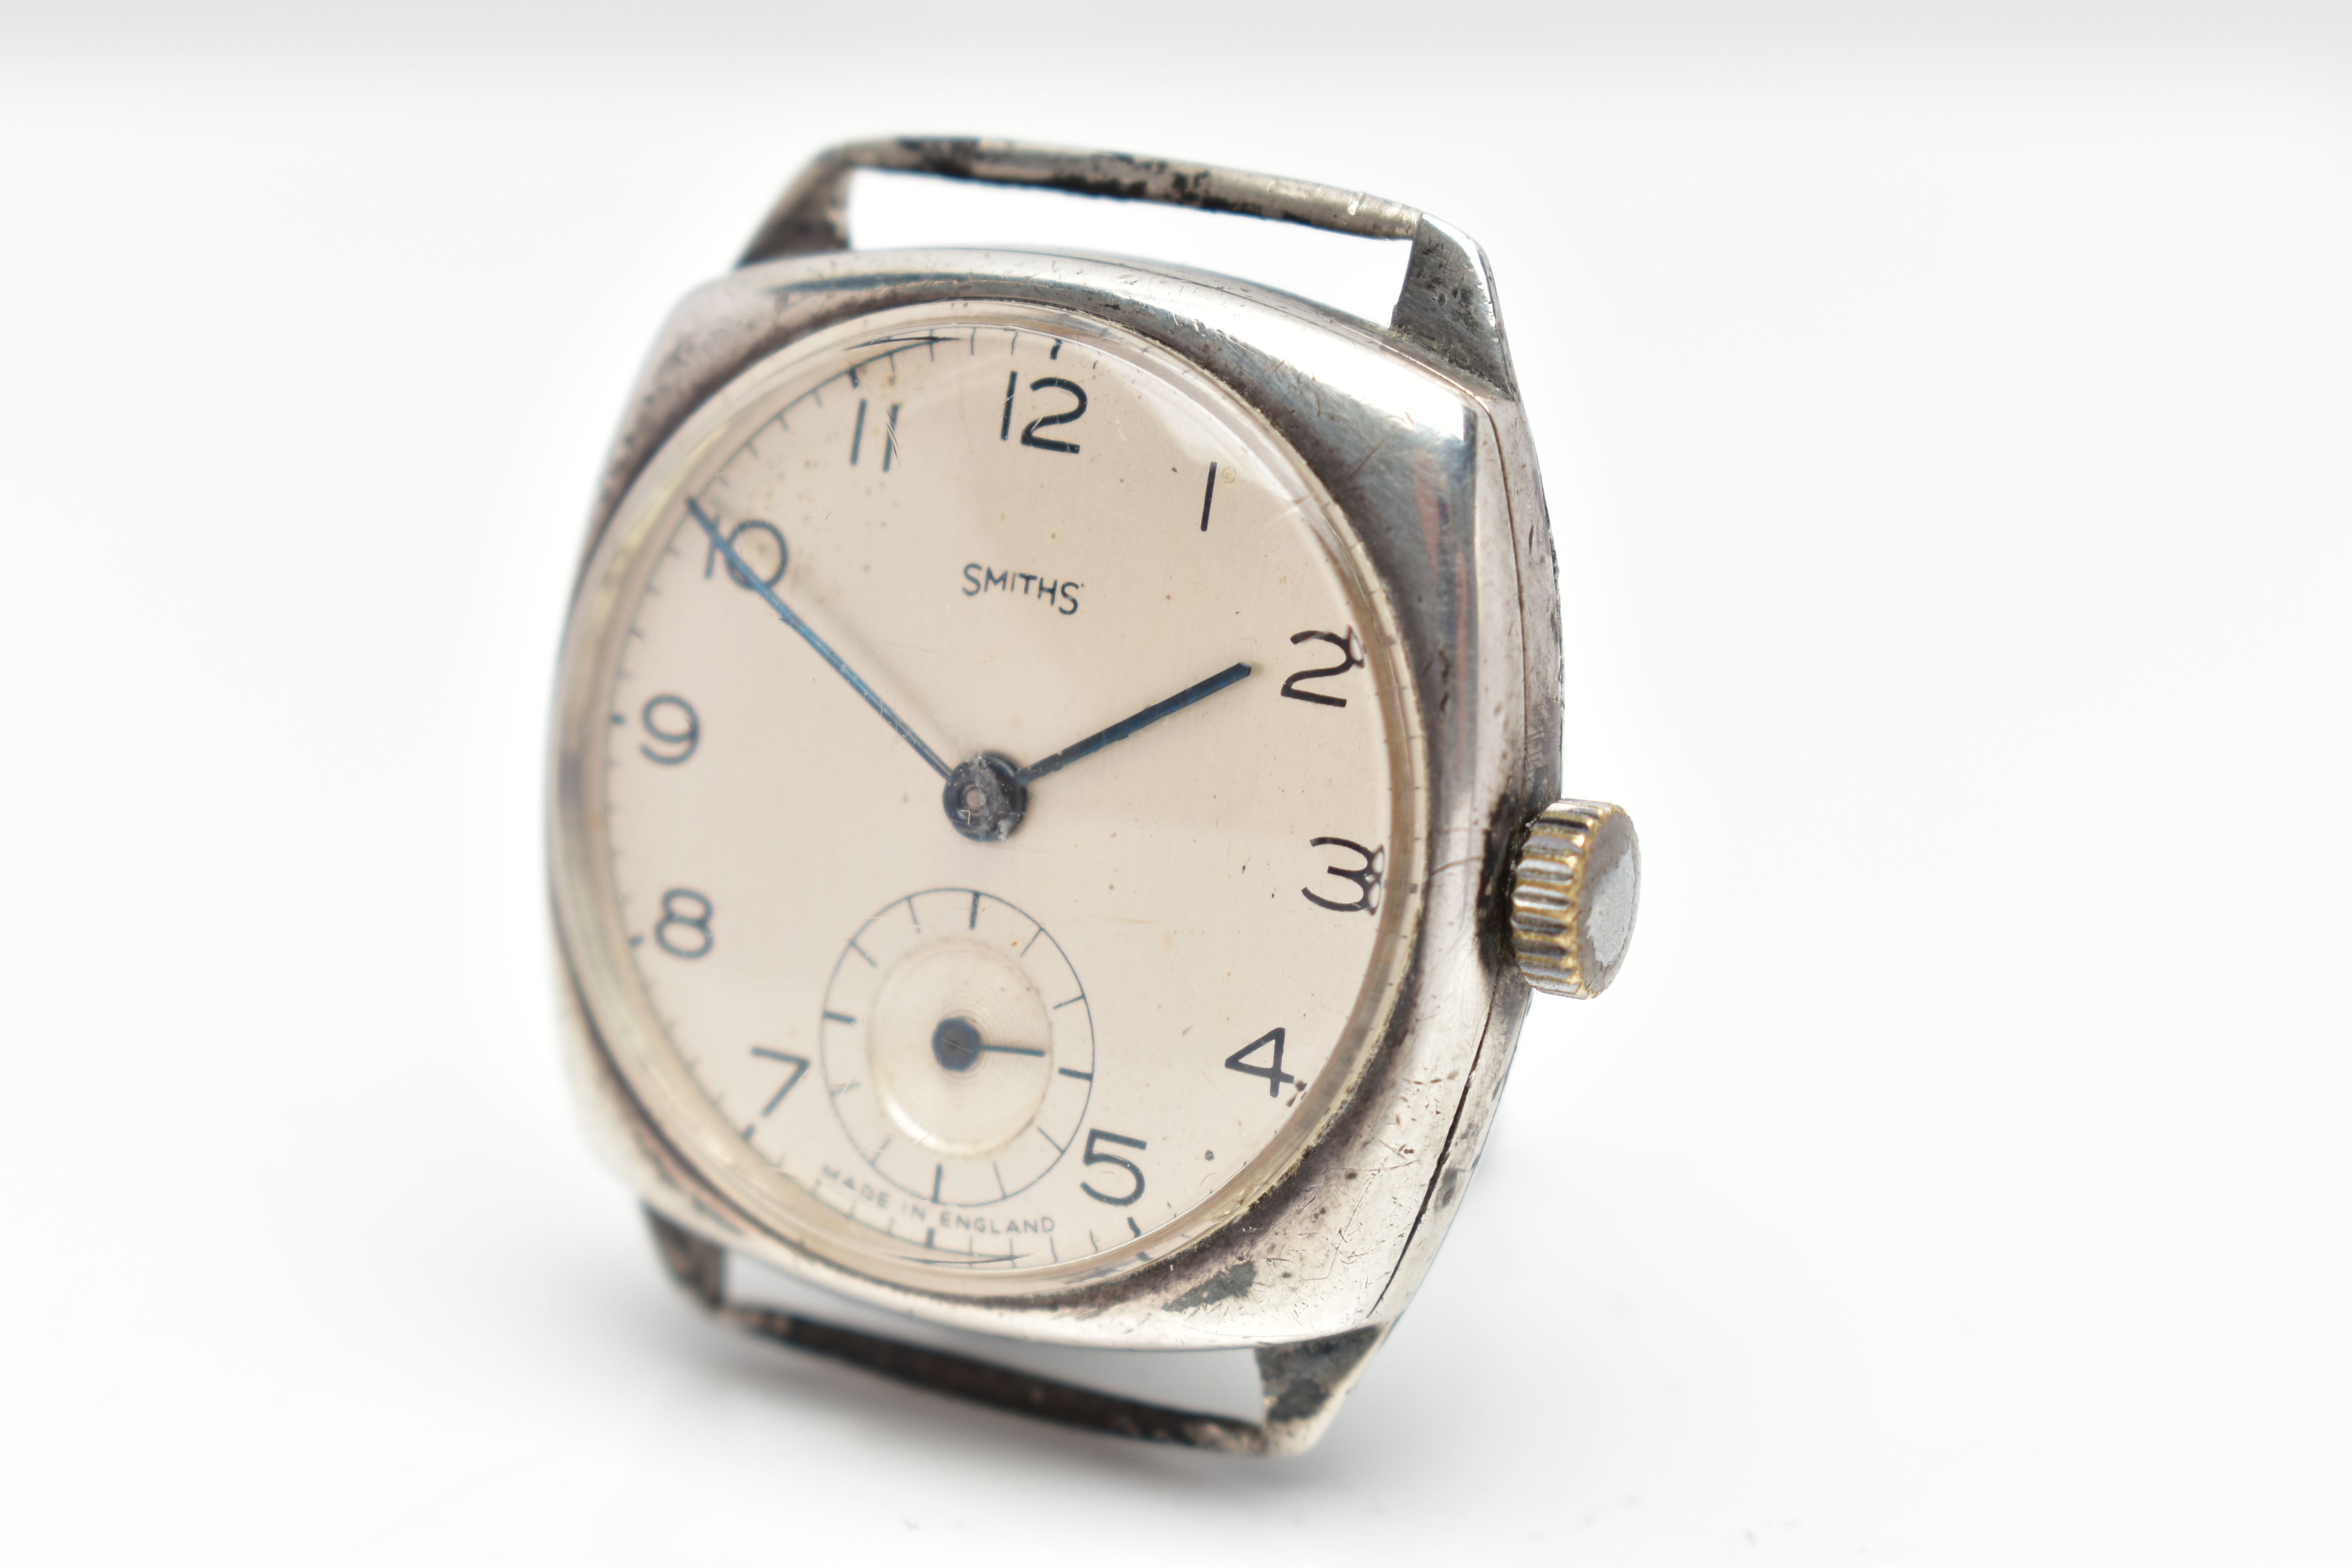 A WHITE METAL SMITHS WATCH HEAD, manual wind, cream colour dial, with Arabic hourly markers, - Image 5 of 6